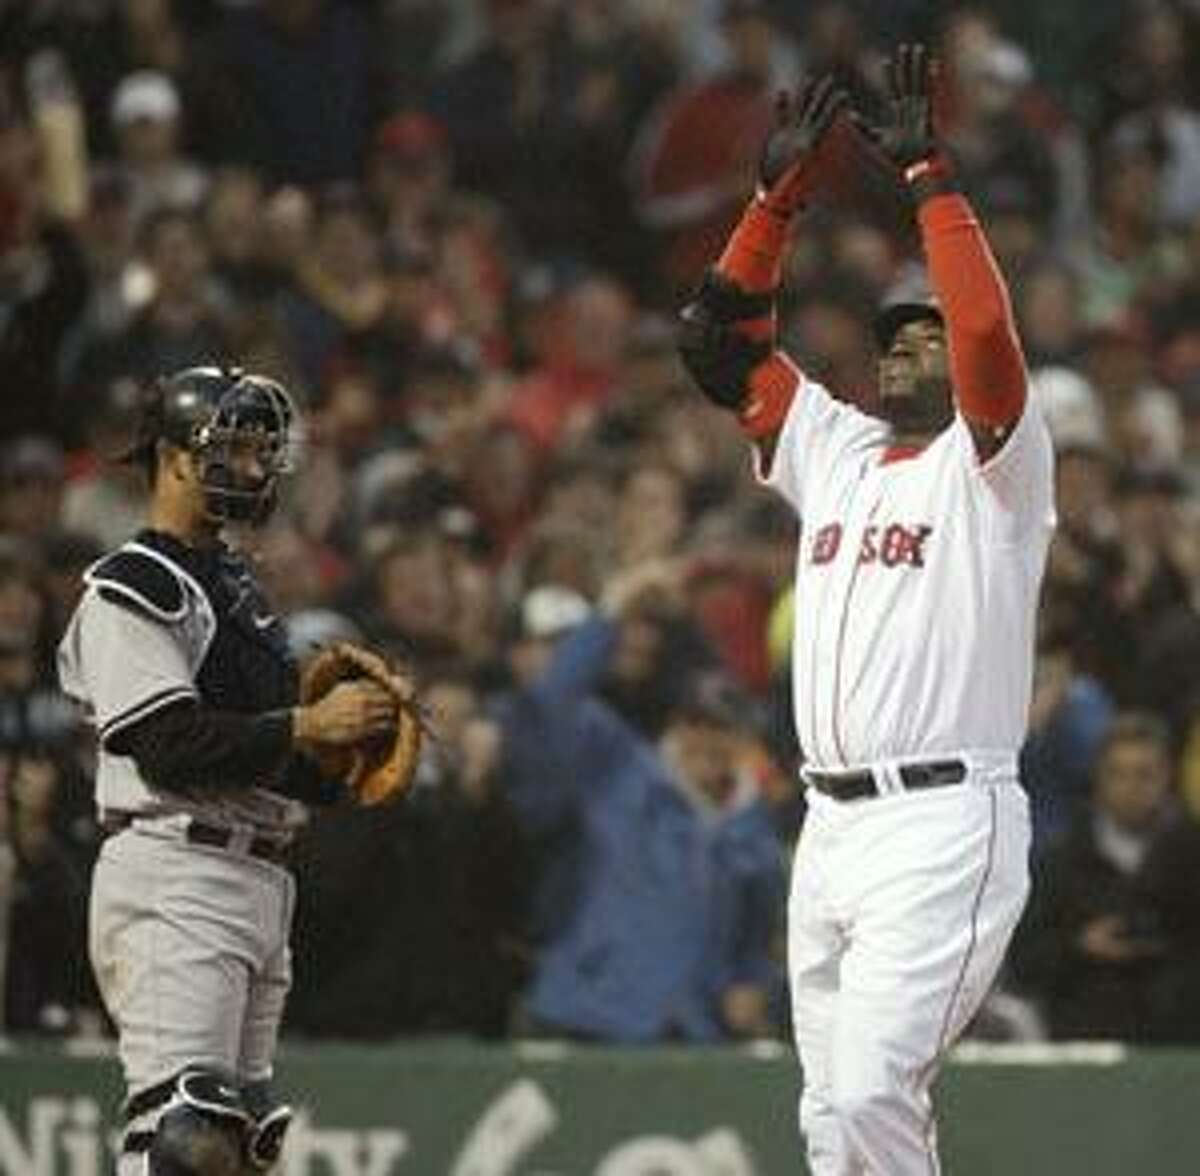 David Ortiz of the Boston Red Sox stands at home plate before he